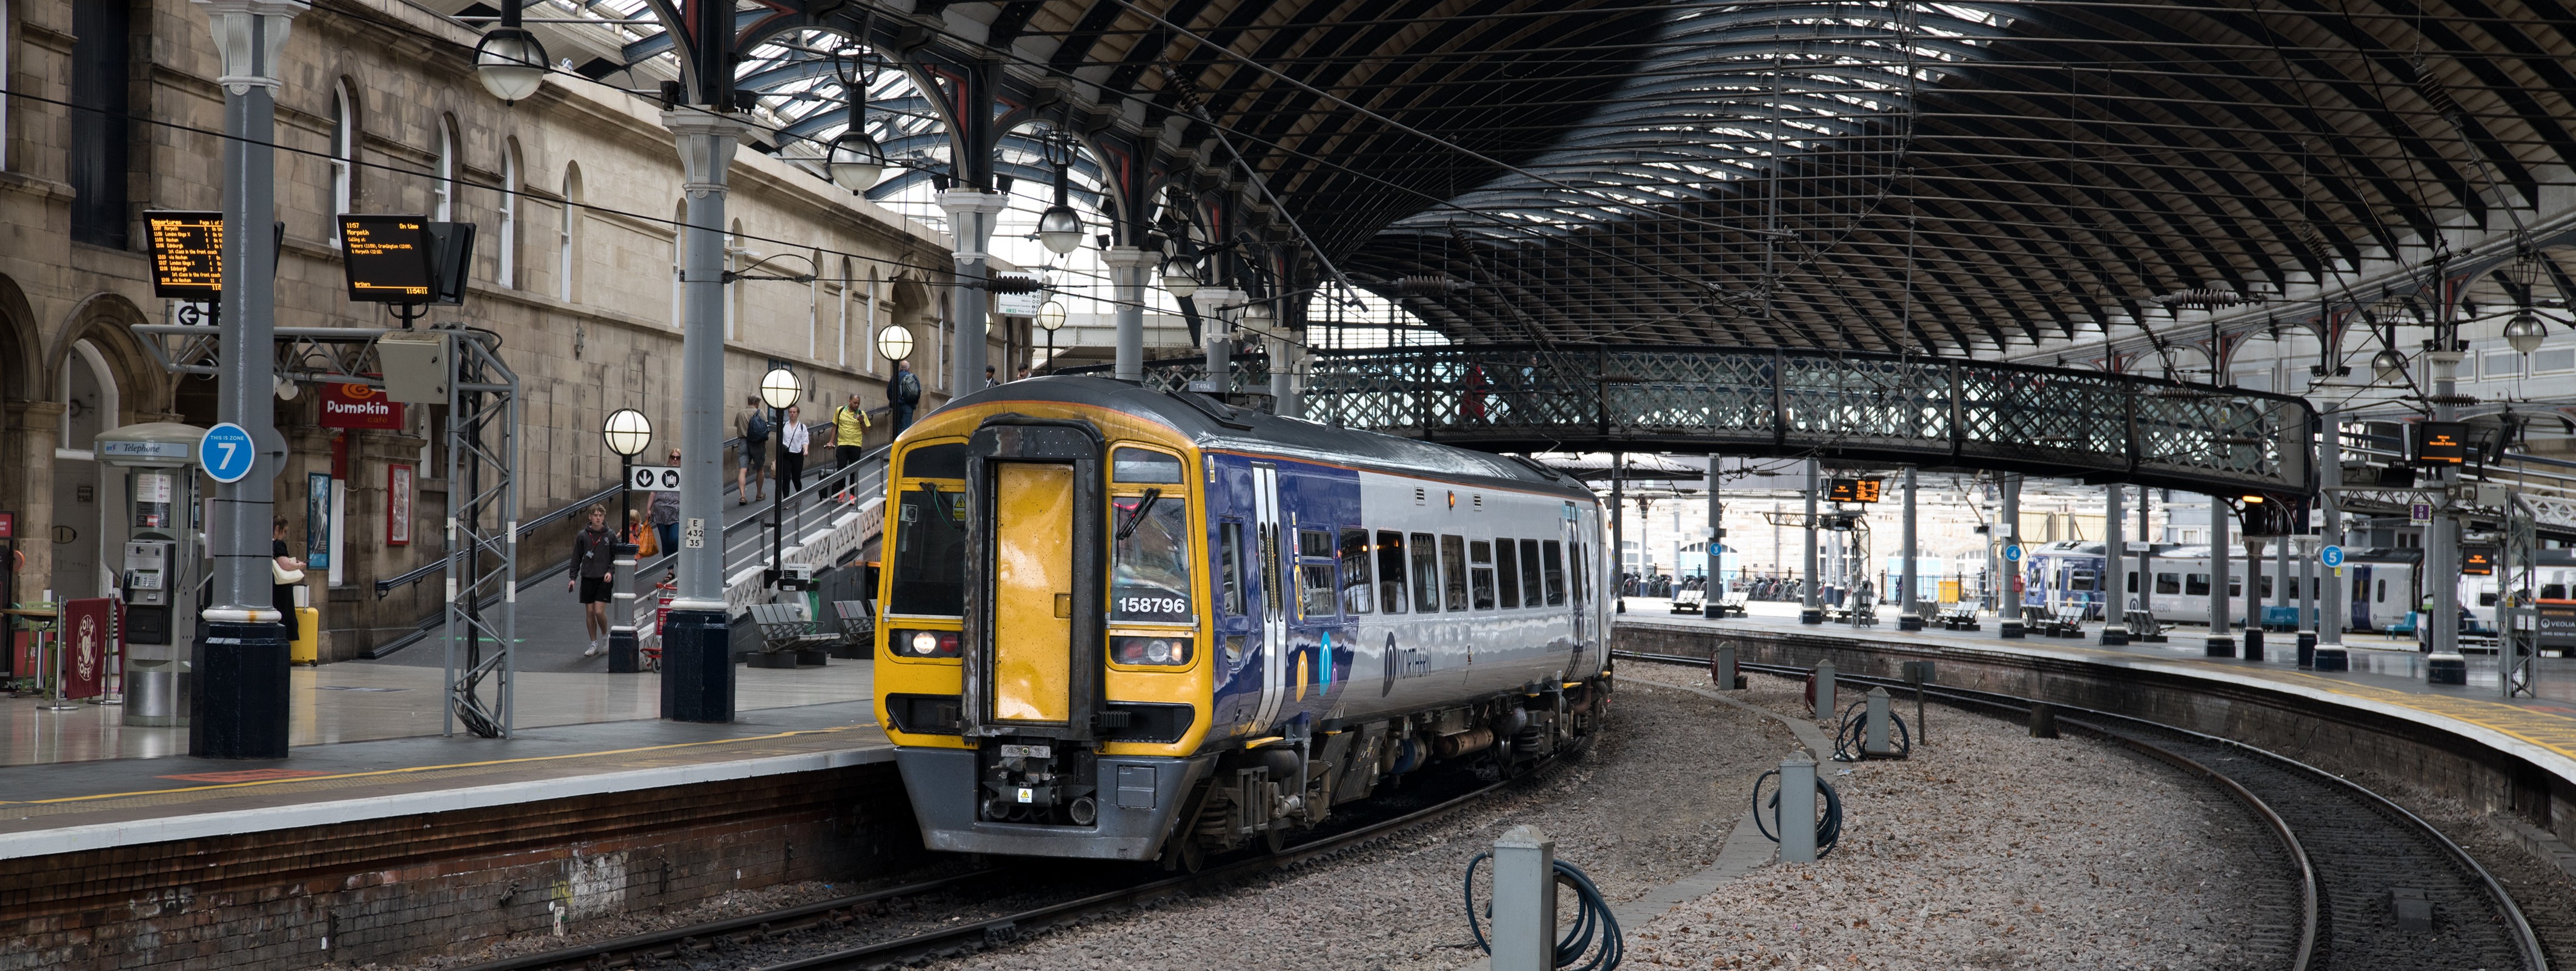 a-train-arrives-at-newcastle-station